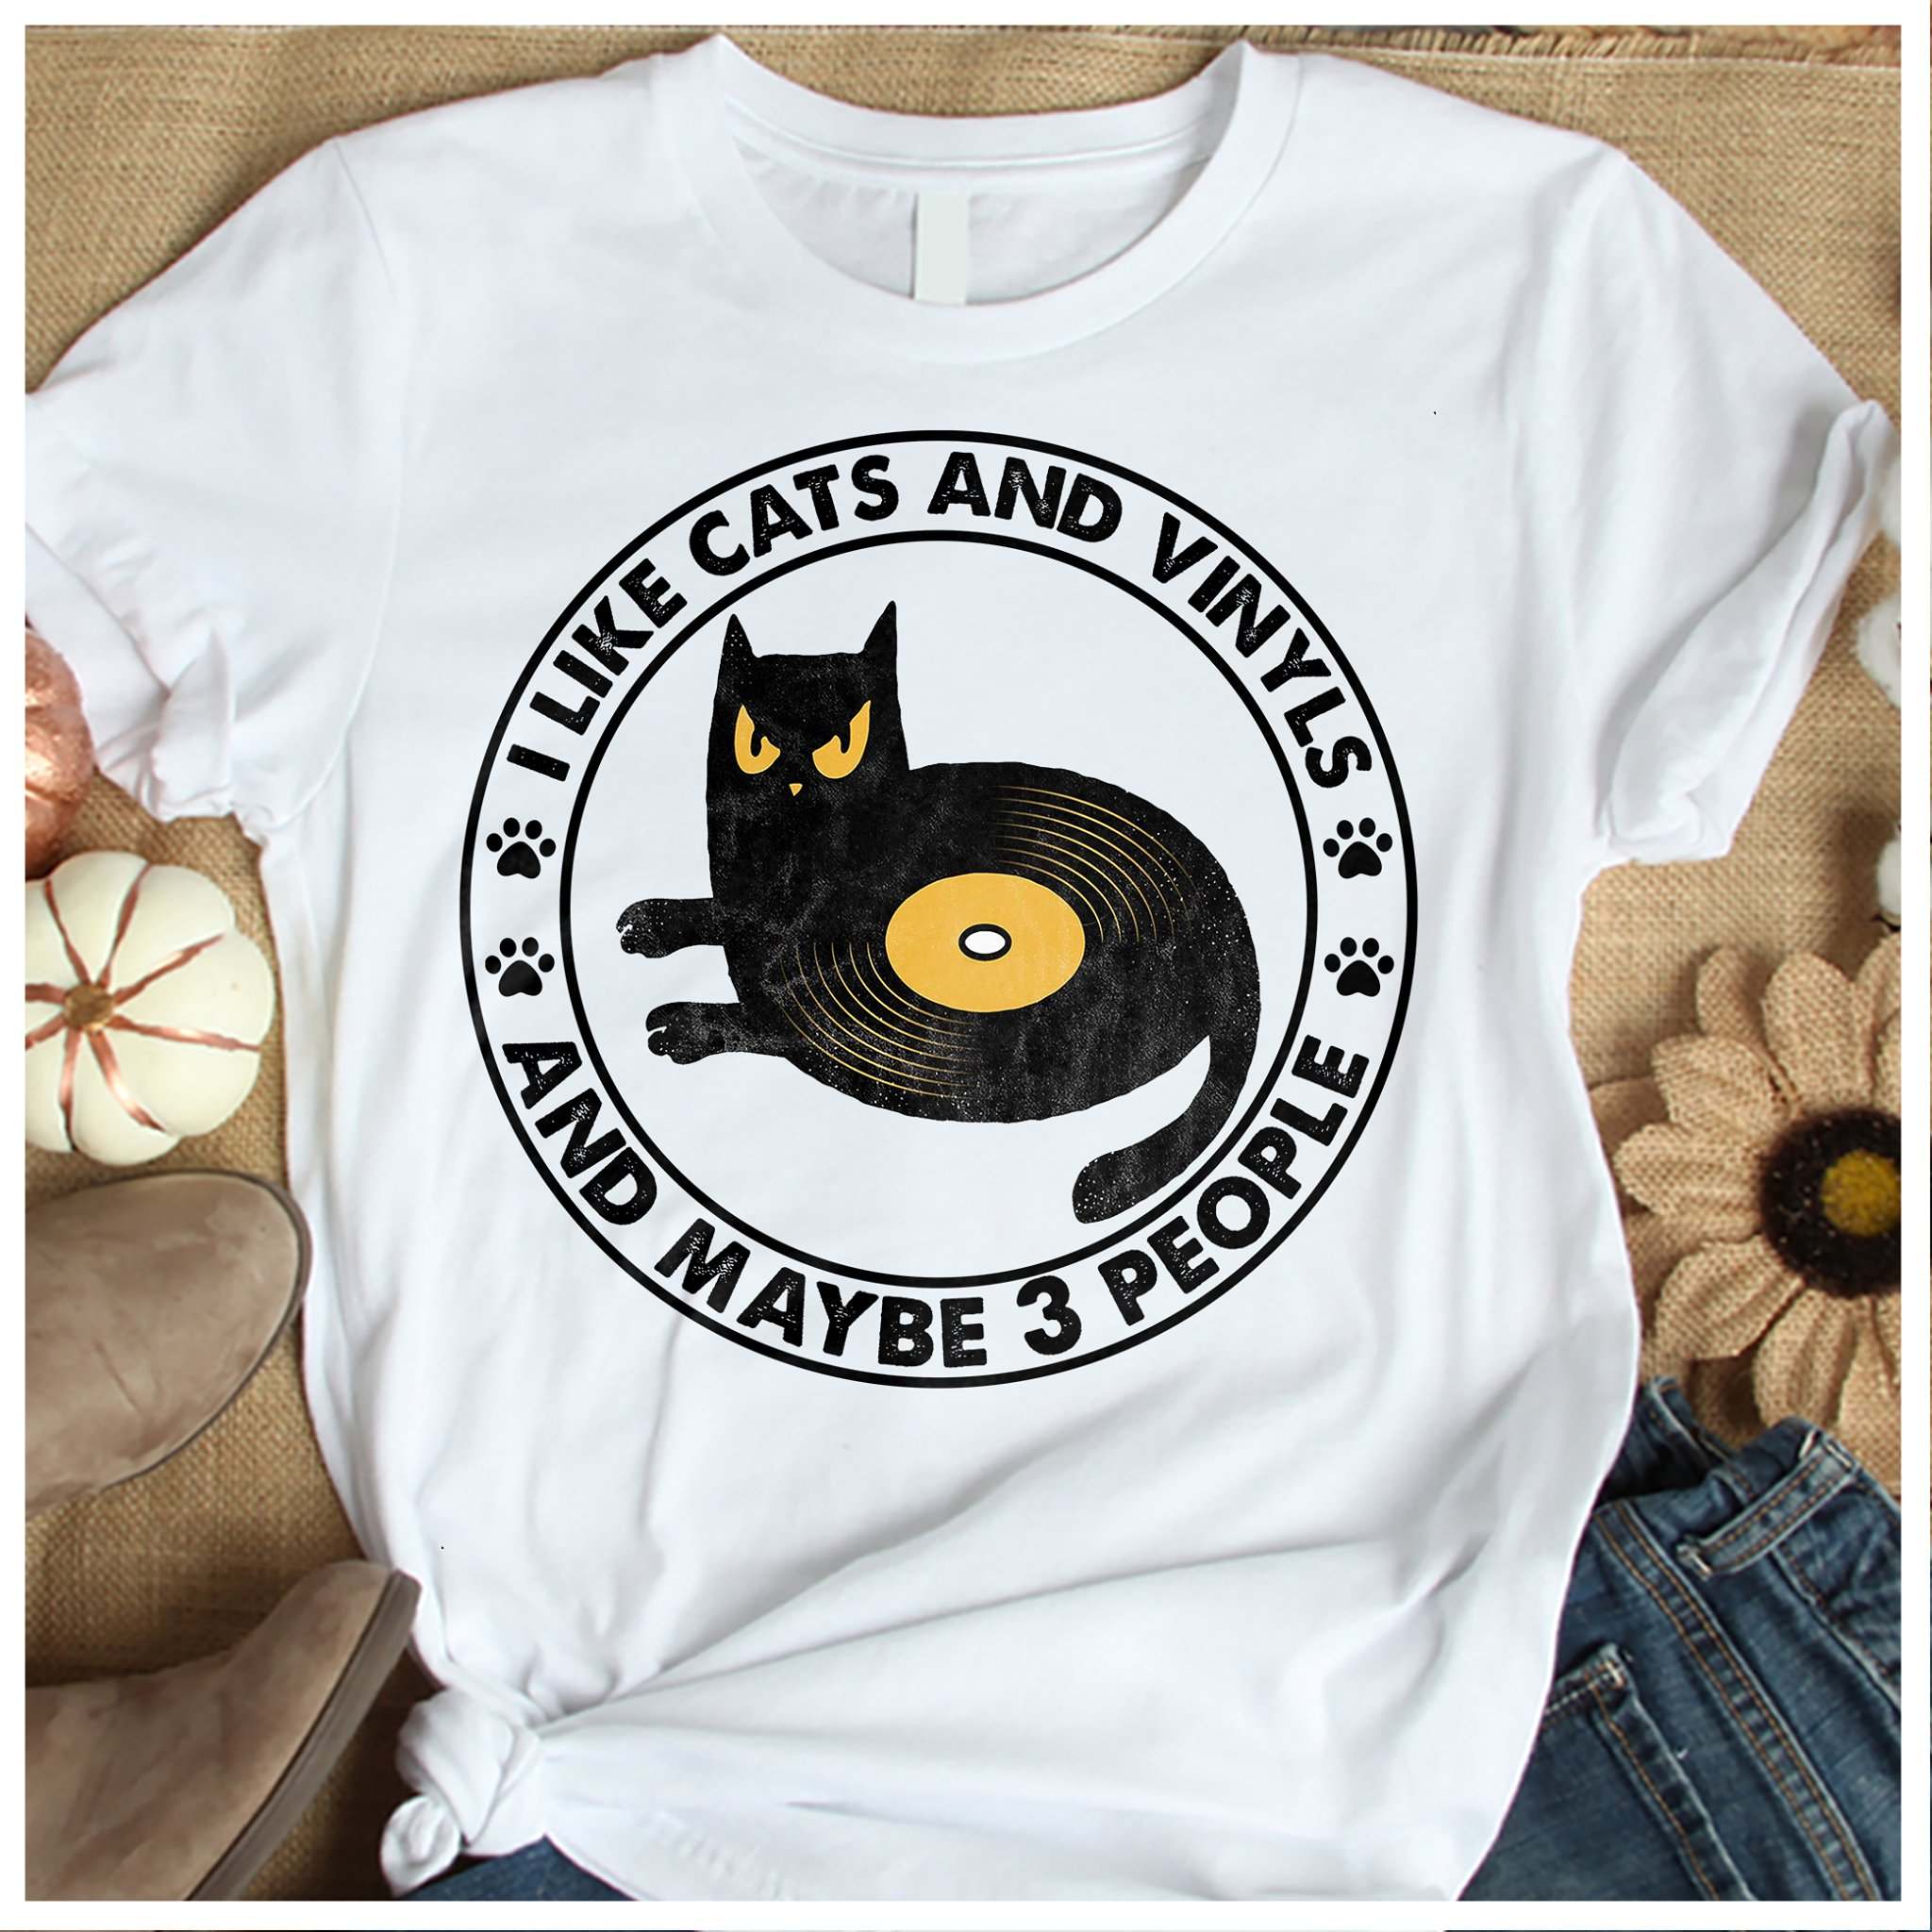 I like cats and vinyls and maybe 3 people - Vinyls music